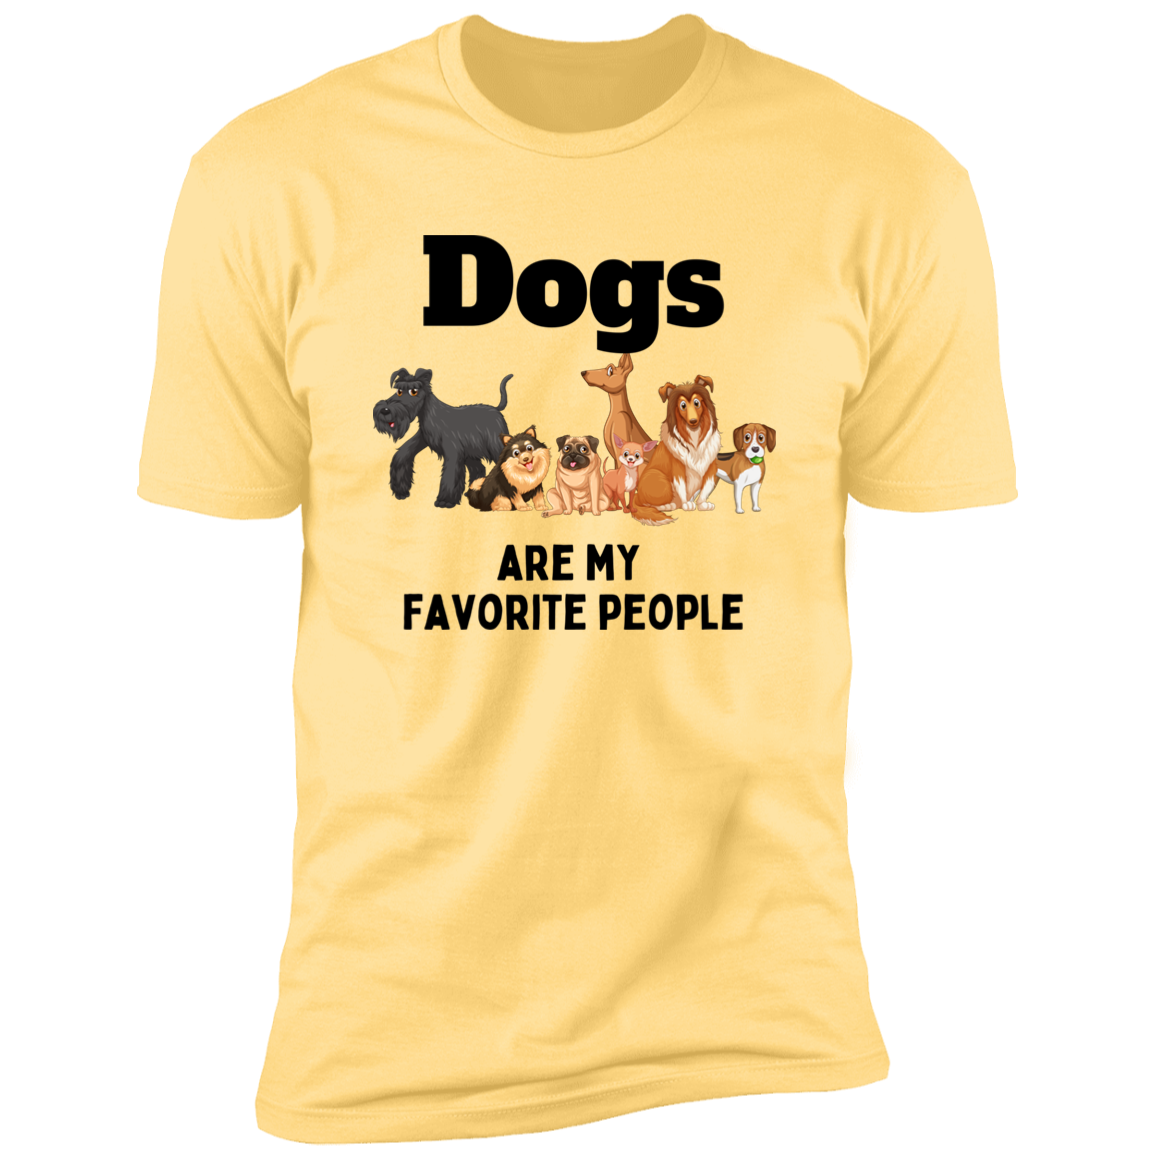 Dogs Are My Favorite People t-shirt, dog shirt for humans, in banana cream